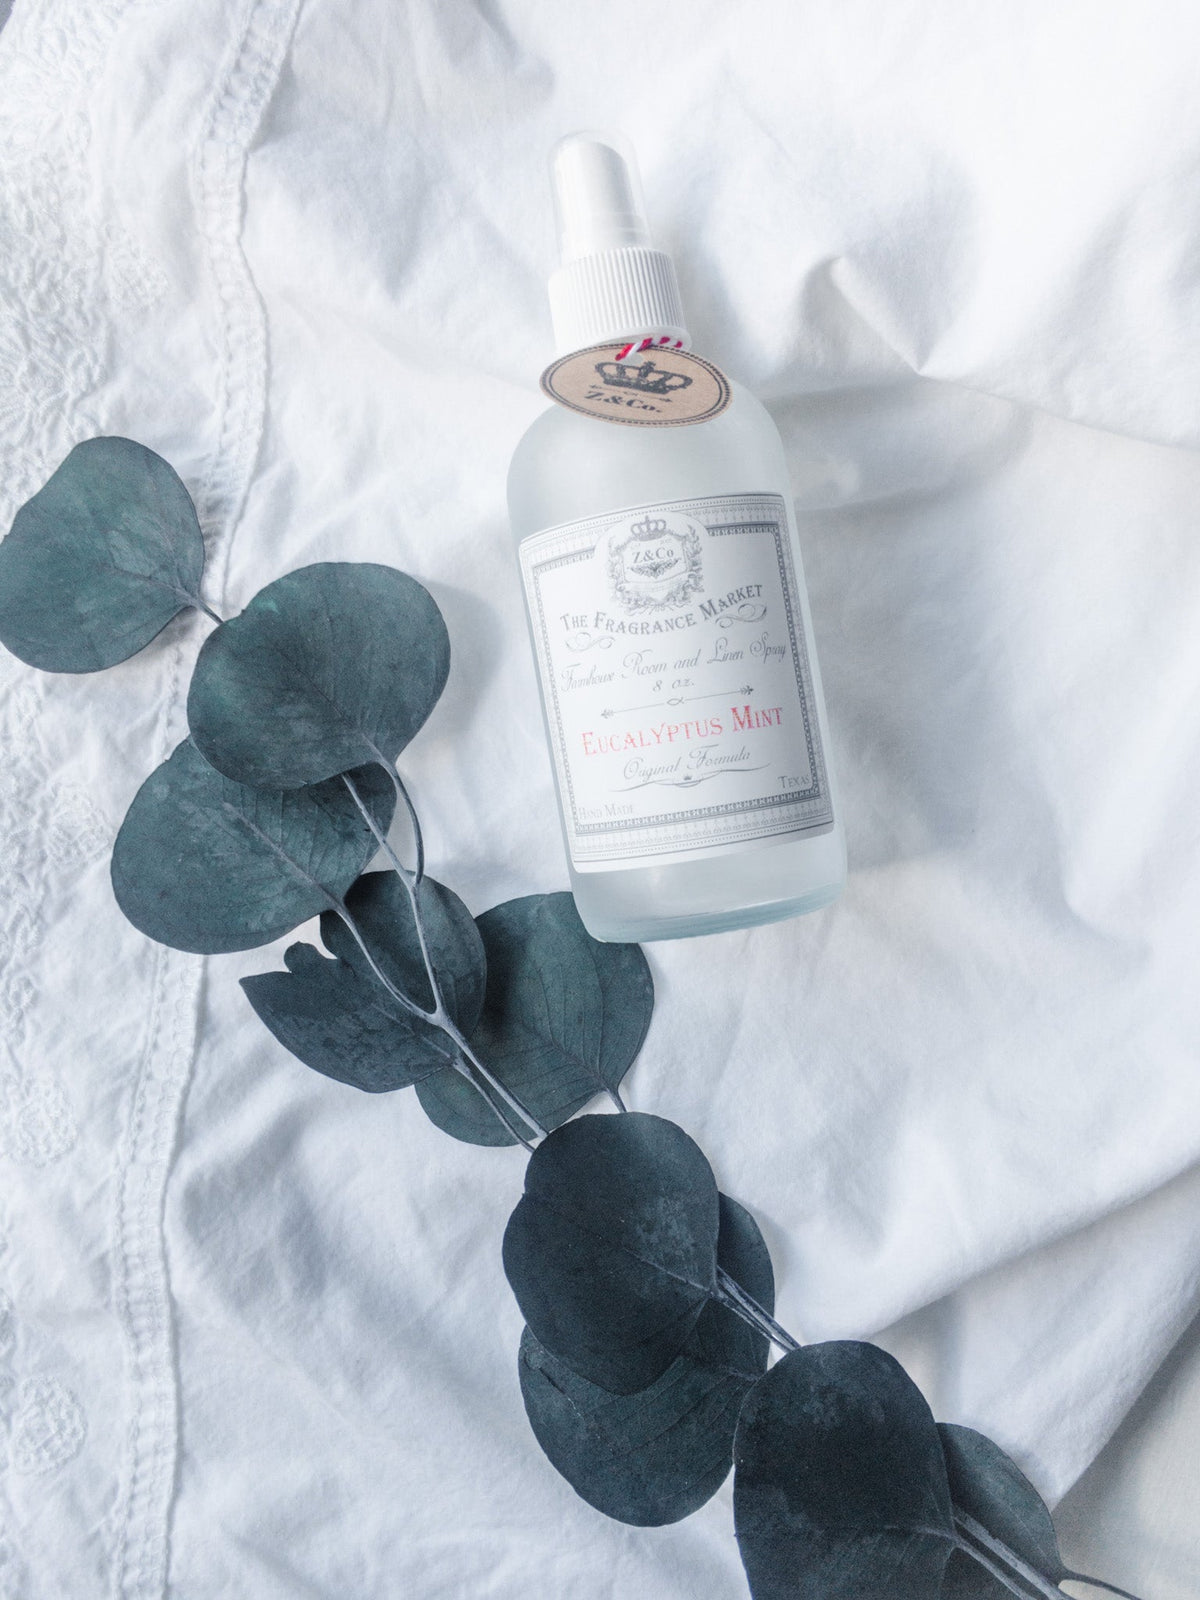 A bottle of Z&Co. Eucalyptus Mint Farmhouse Room & Linen Spray sits on a white fabric background, accompanied by a sprig of eucalyptus leaves. The setting is soft.